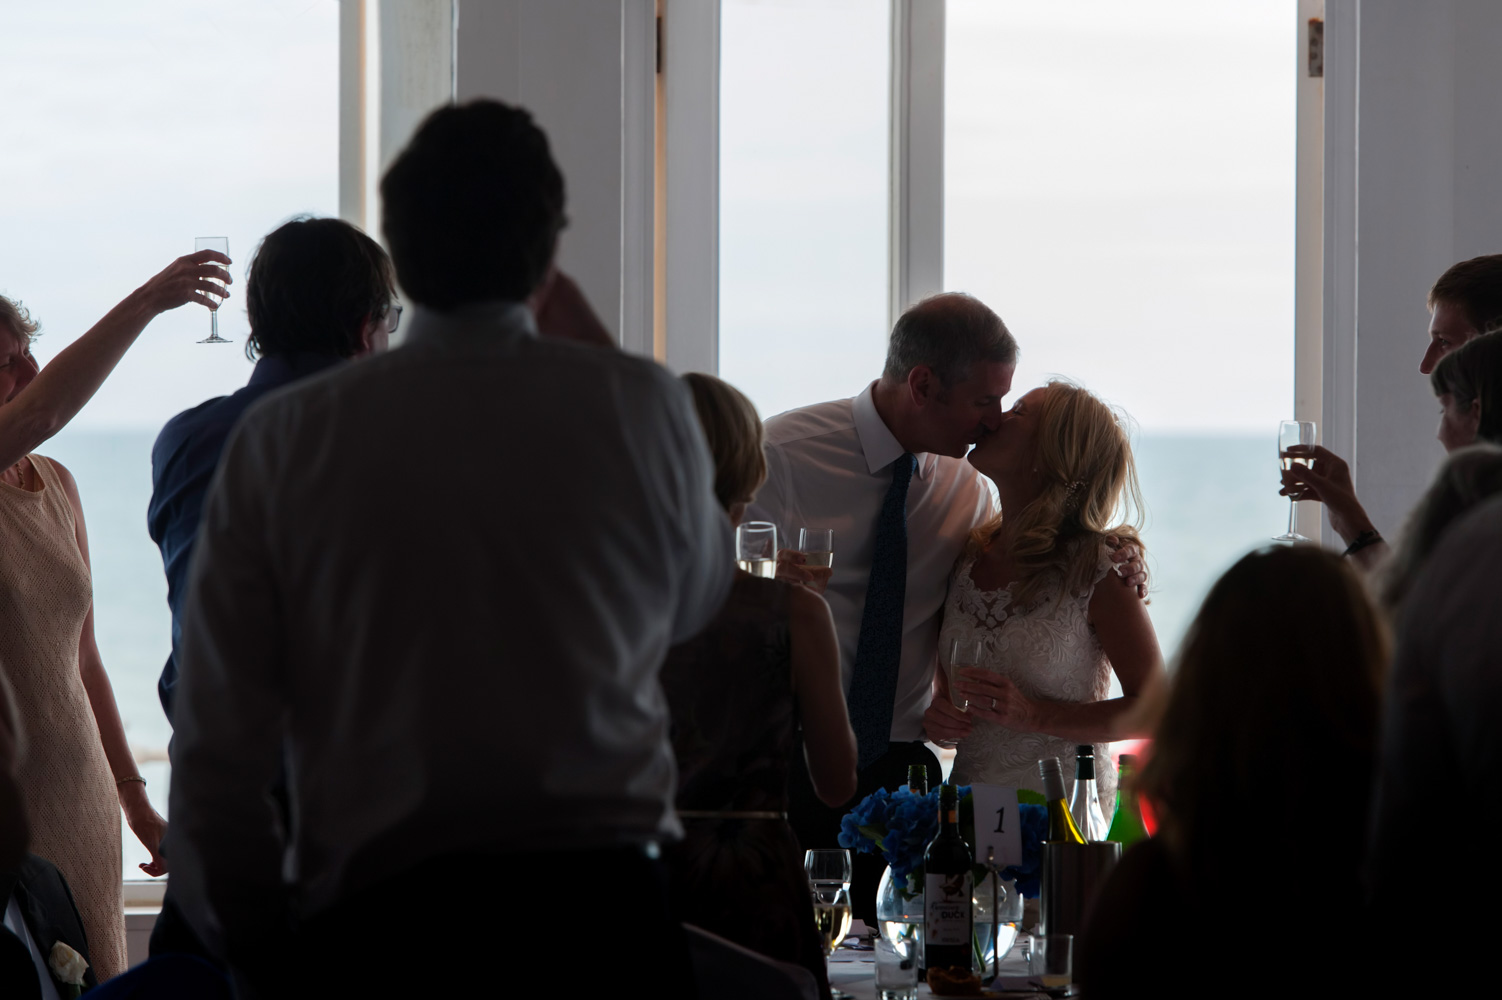 Wedding reception at the Azur Hastings by informal Sussex wedding photographer James Robertshaw